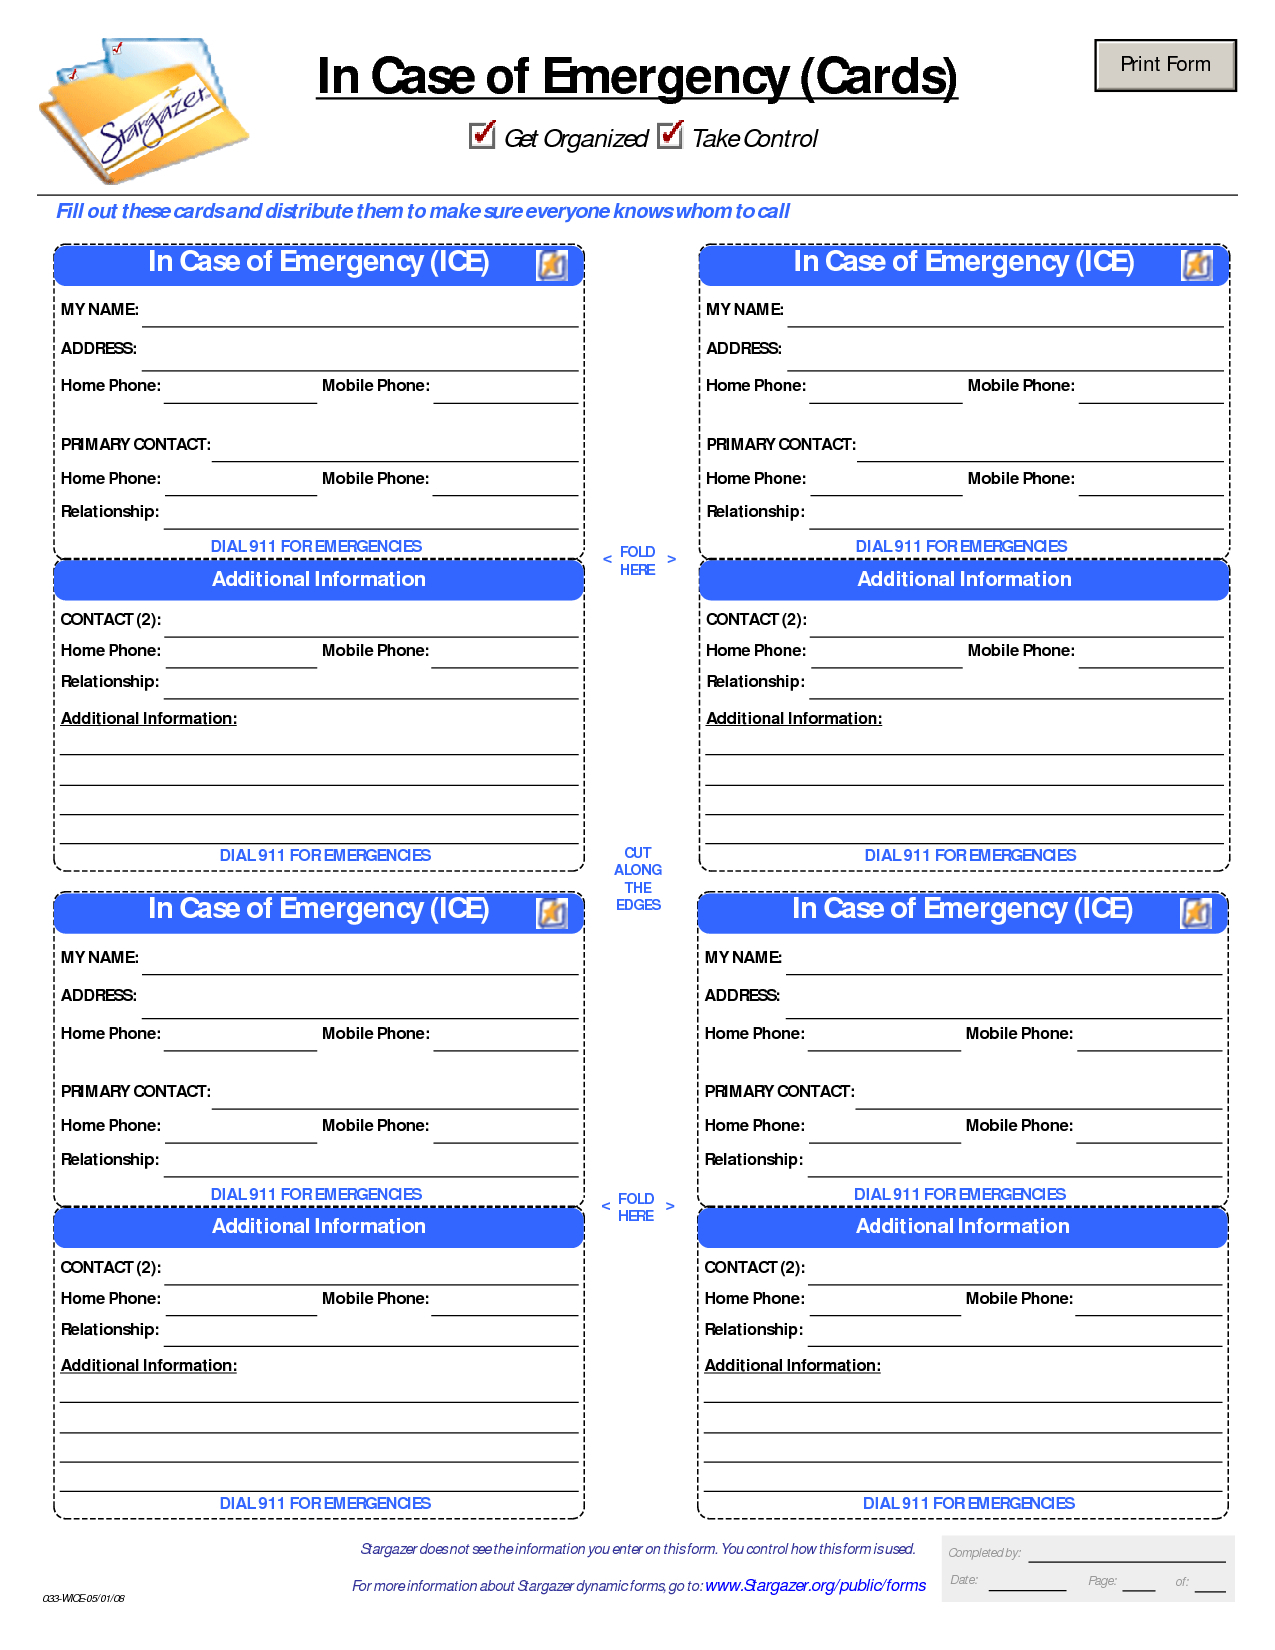 Patient Medication Card Template | Emergency Kits Intended For Id Card Template For Kids